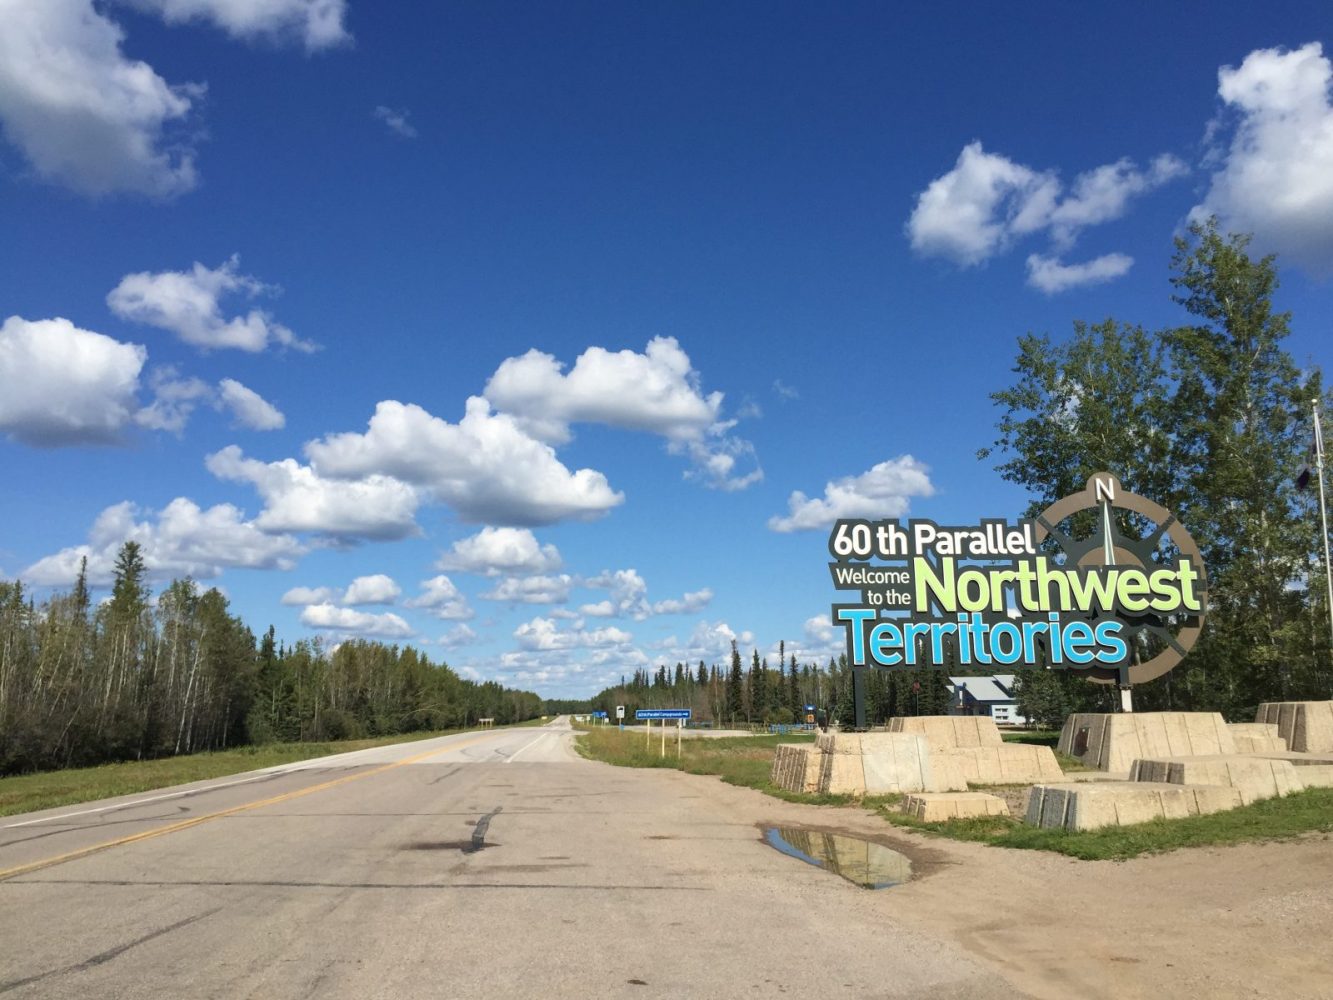 The Canadian Prairies; Tough driving for 3,000 km on the Yellowhead Highway